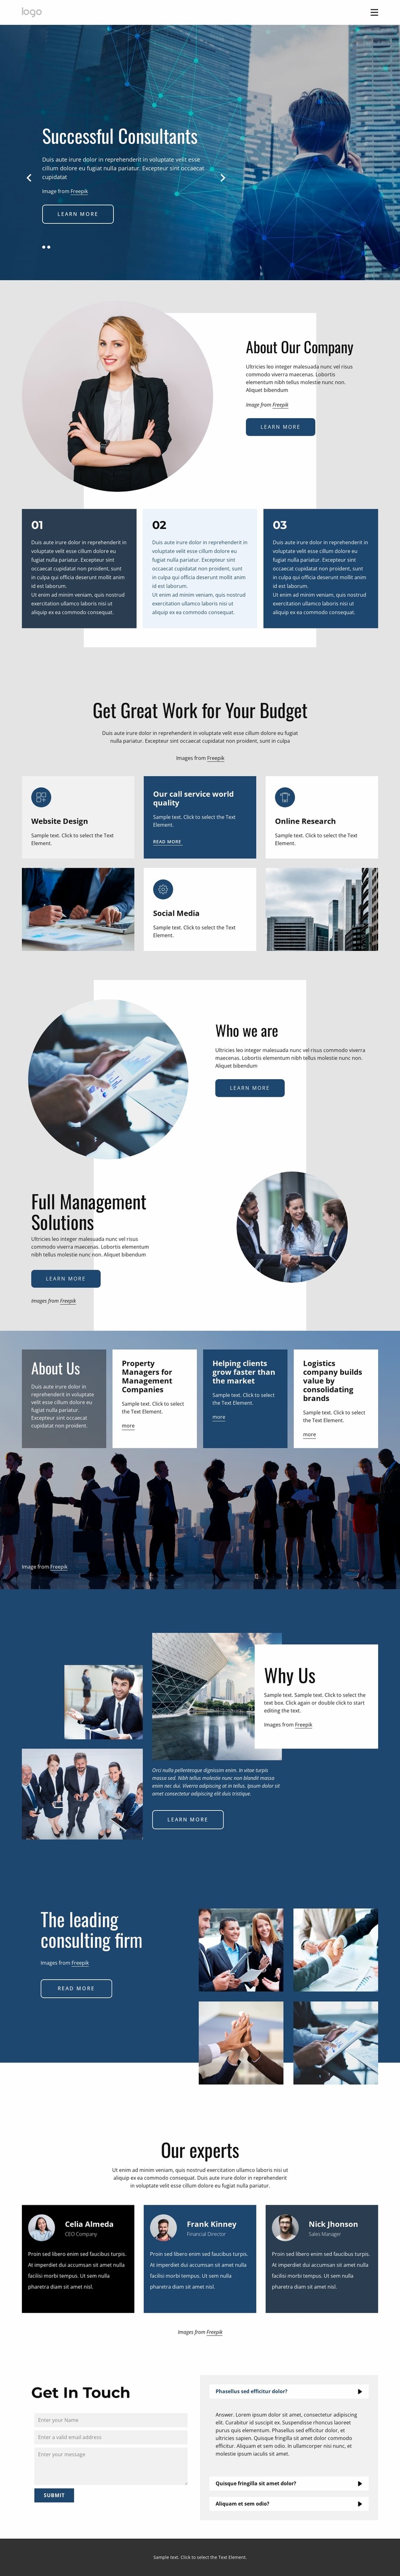 We offer tailored consulting services Website Design